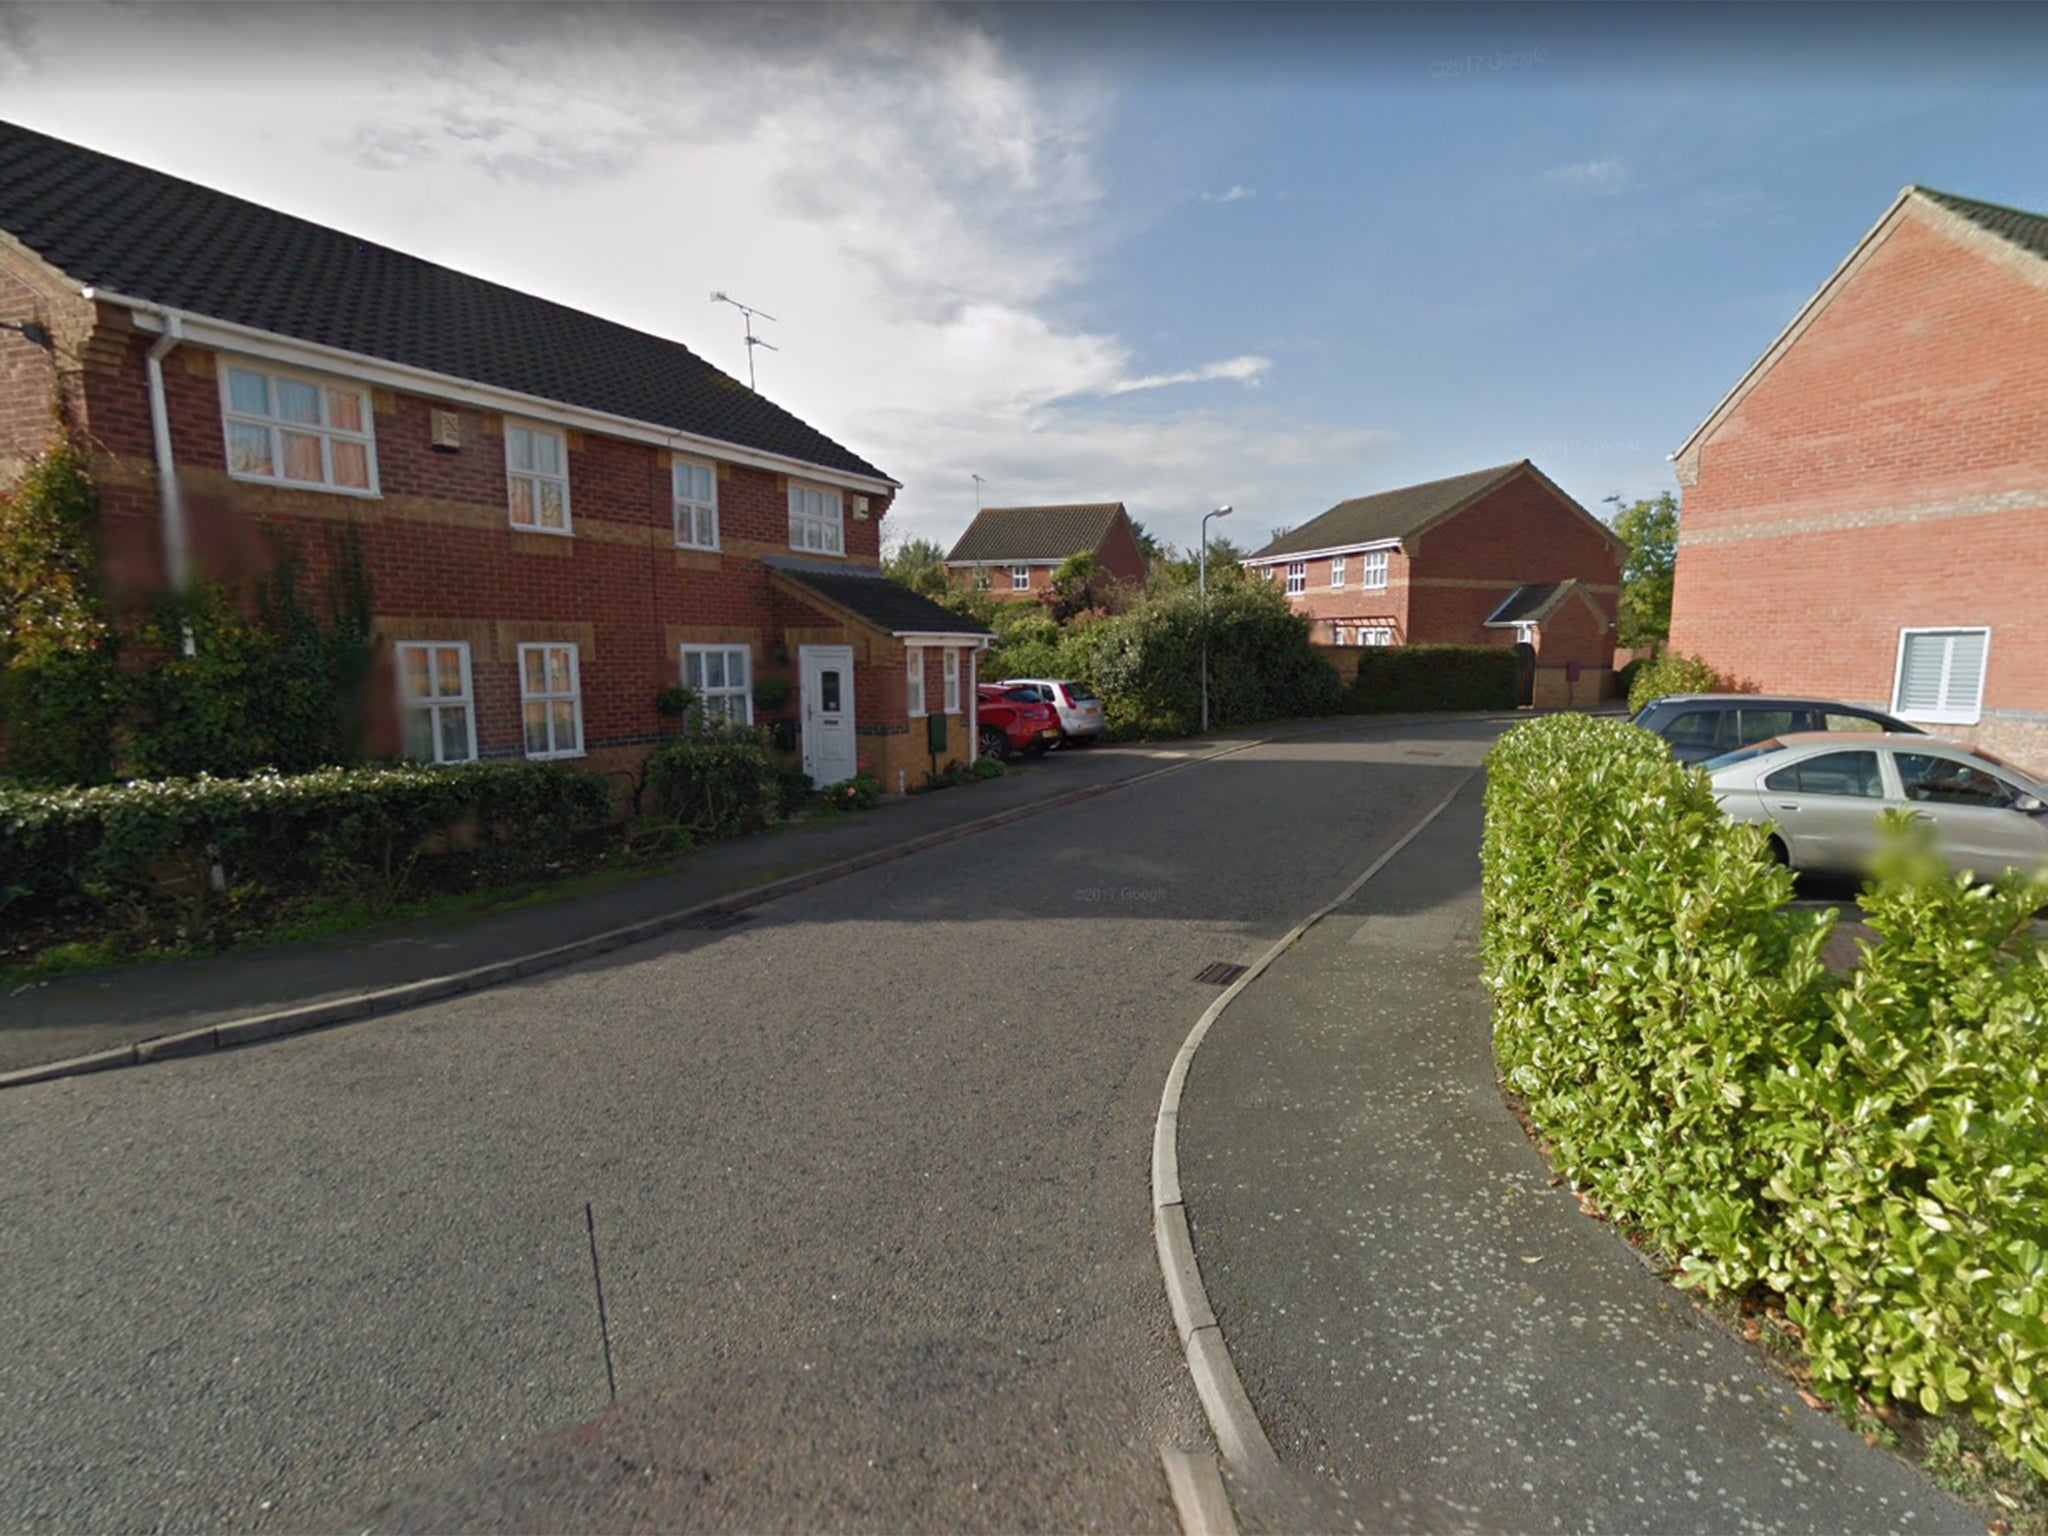 The body was found at a property in Derby Close, Langdon Hills.